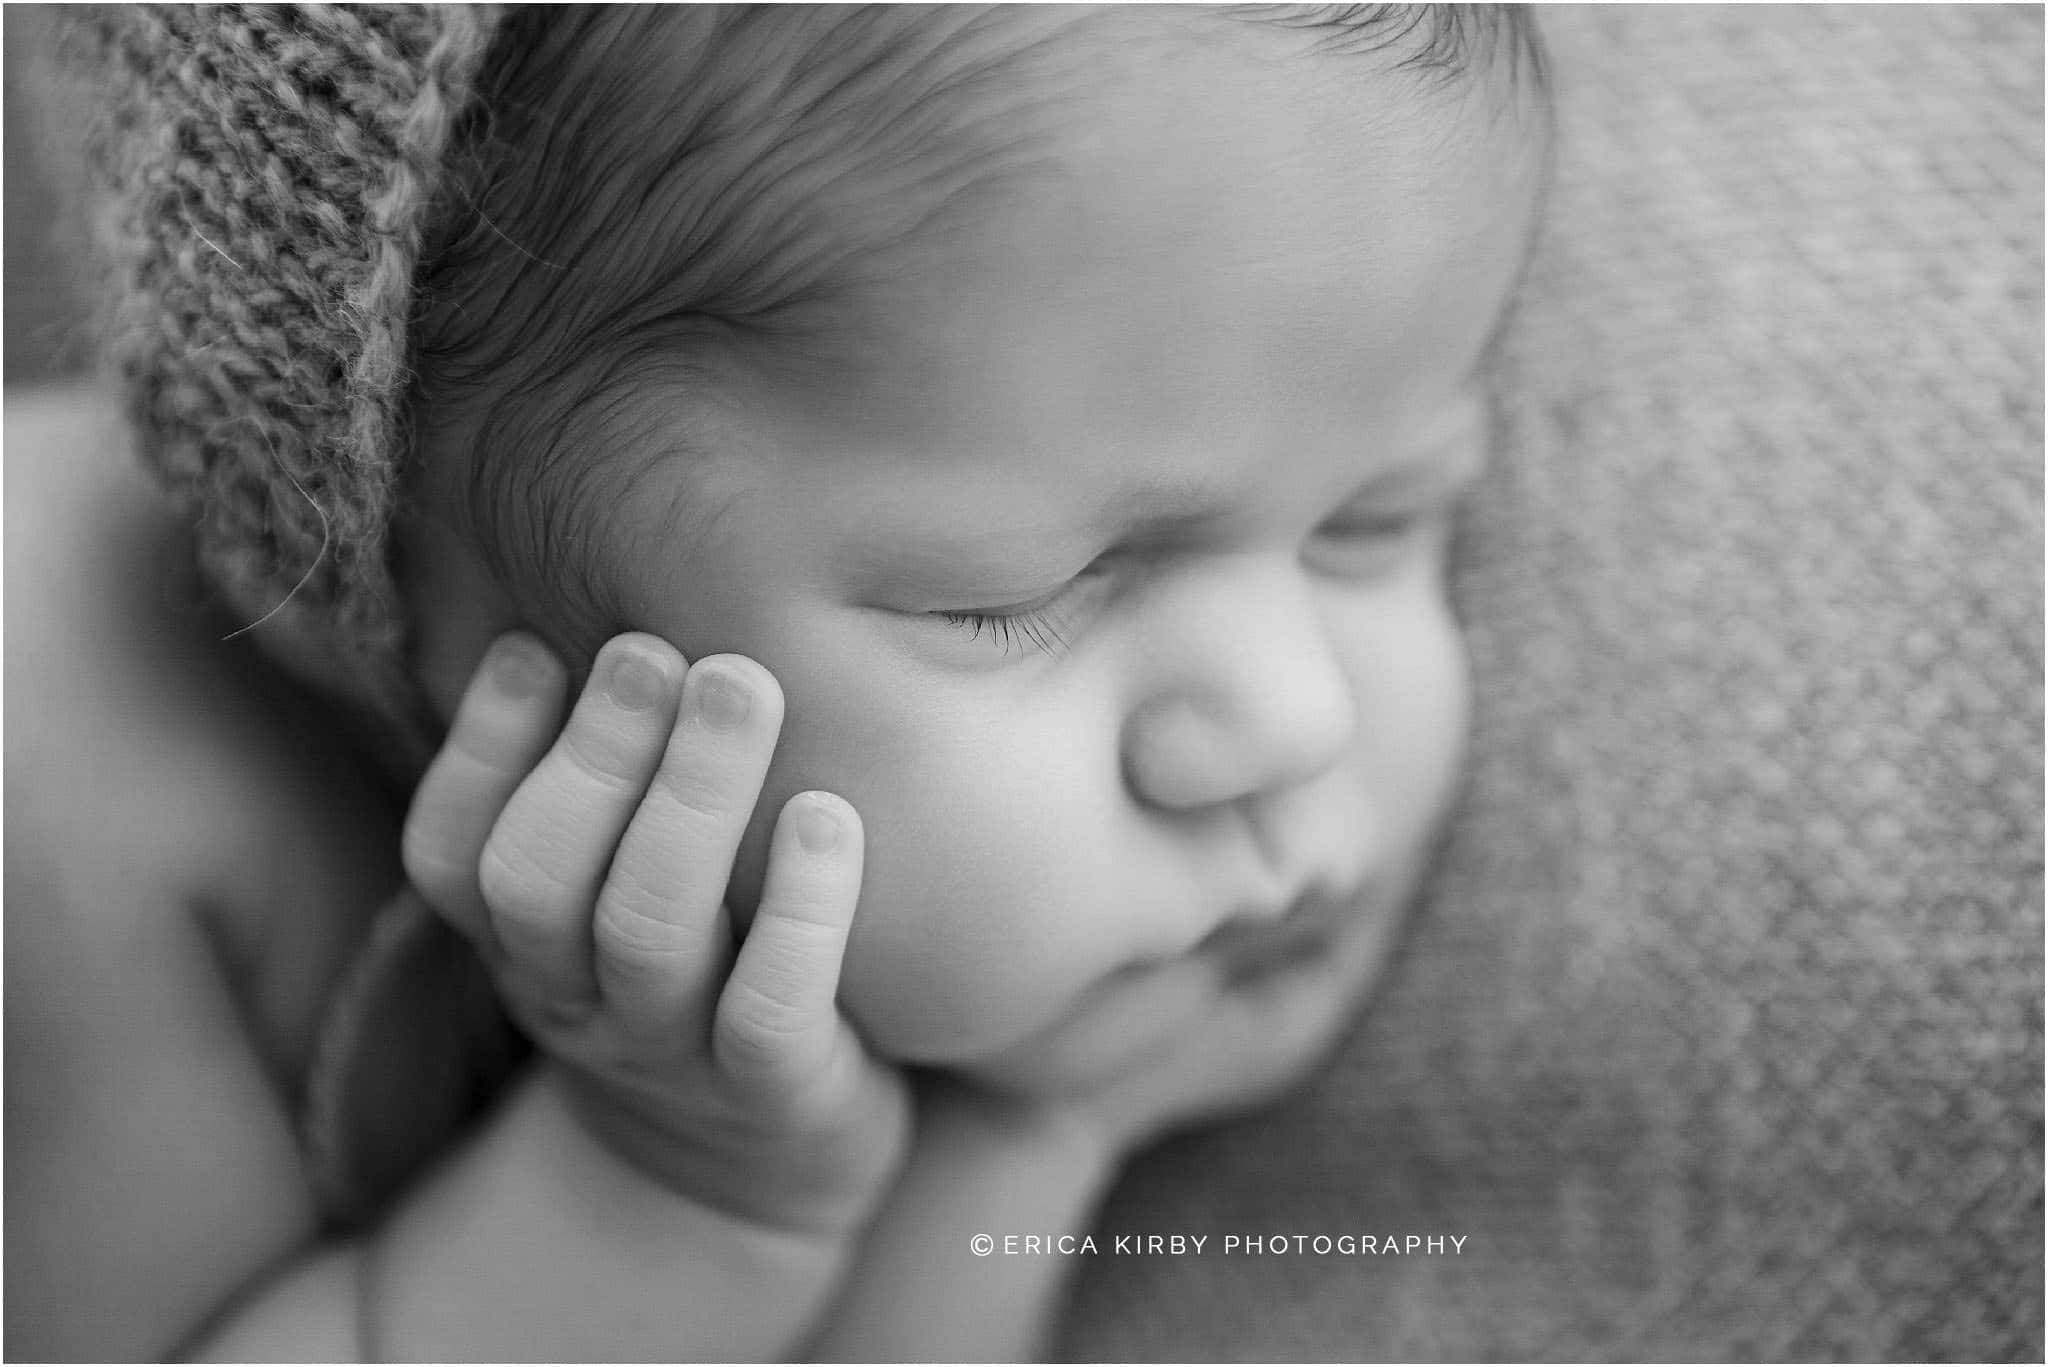 Newborn Photography Bentonville Arkansas | Baby boy newborn session in Bentonville AR gray and browns neutral | Erica Kirby Photograpy